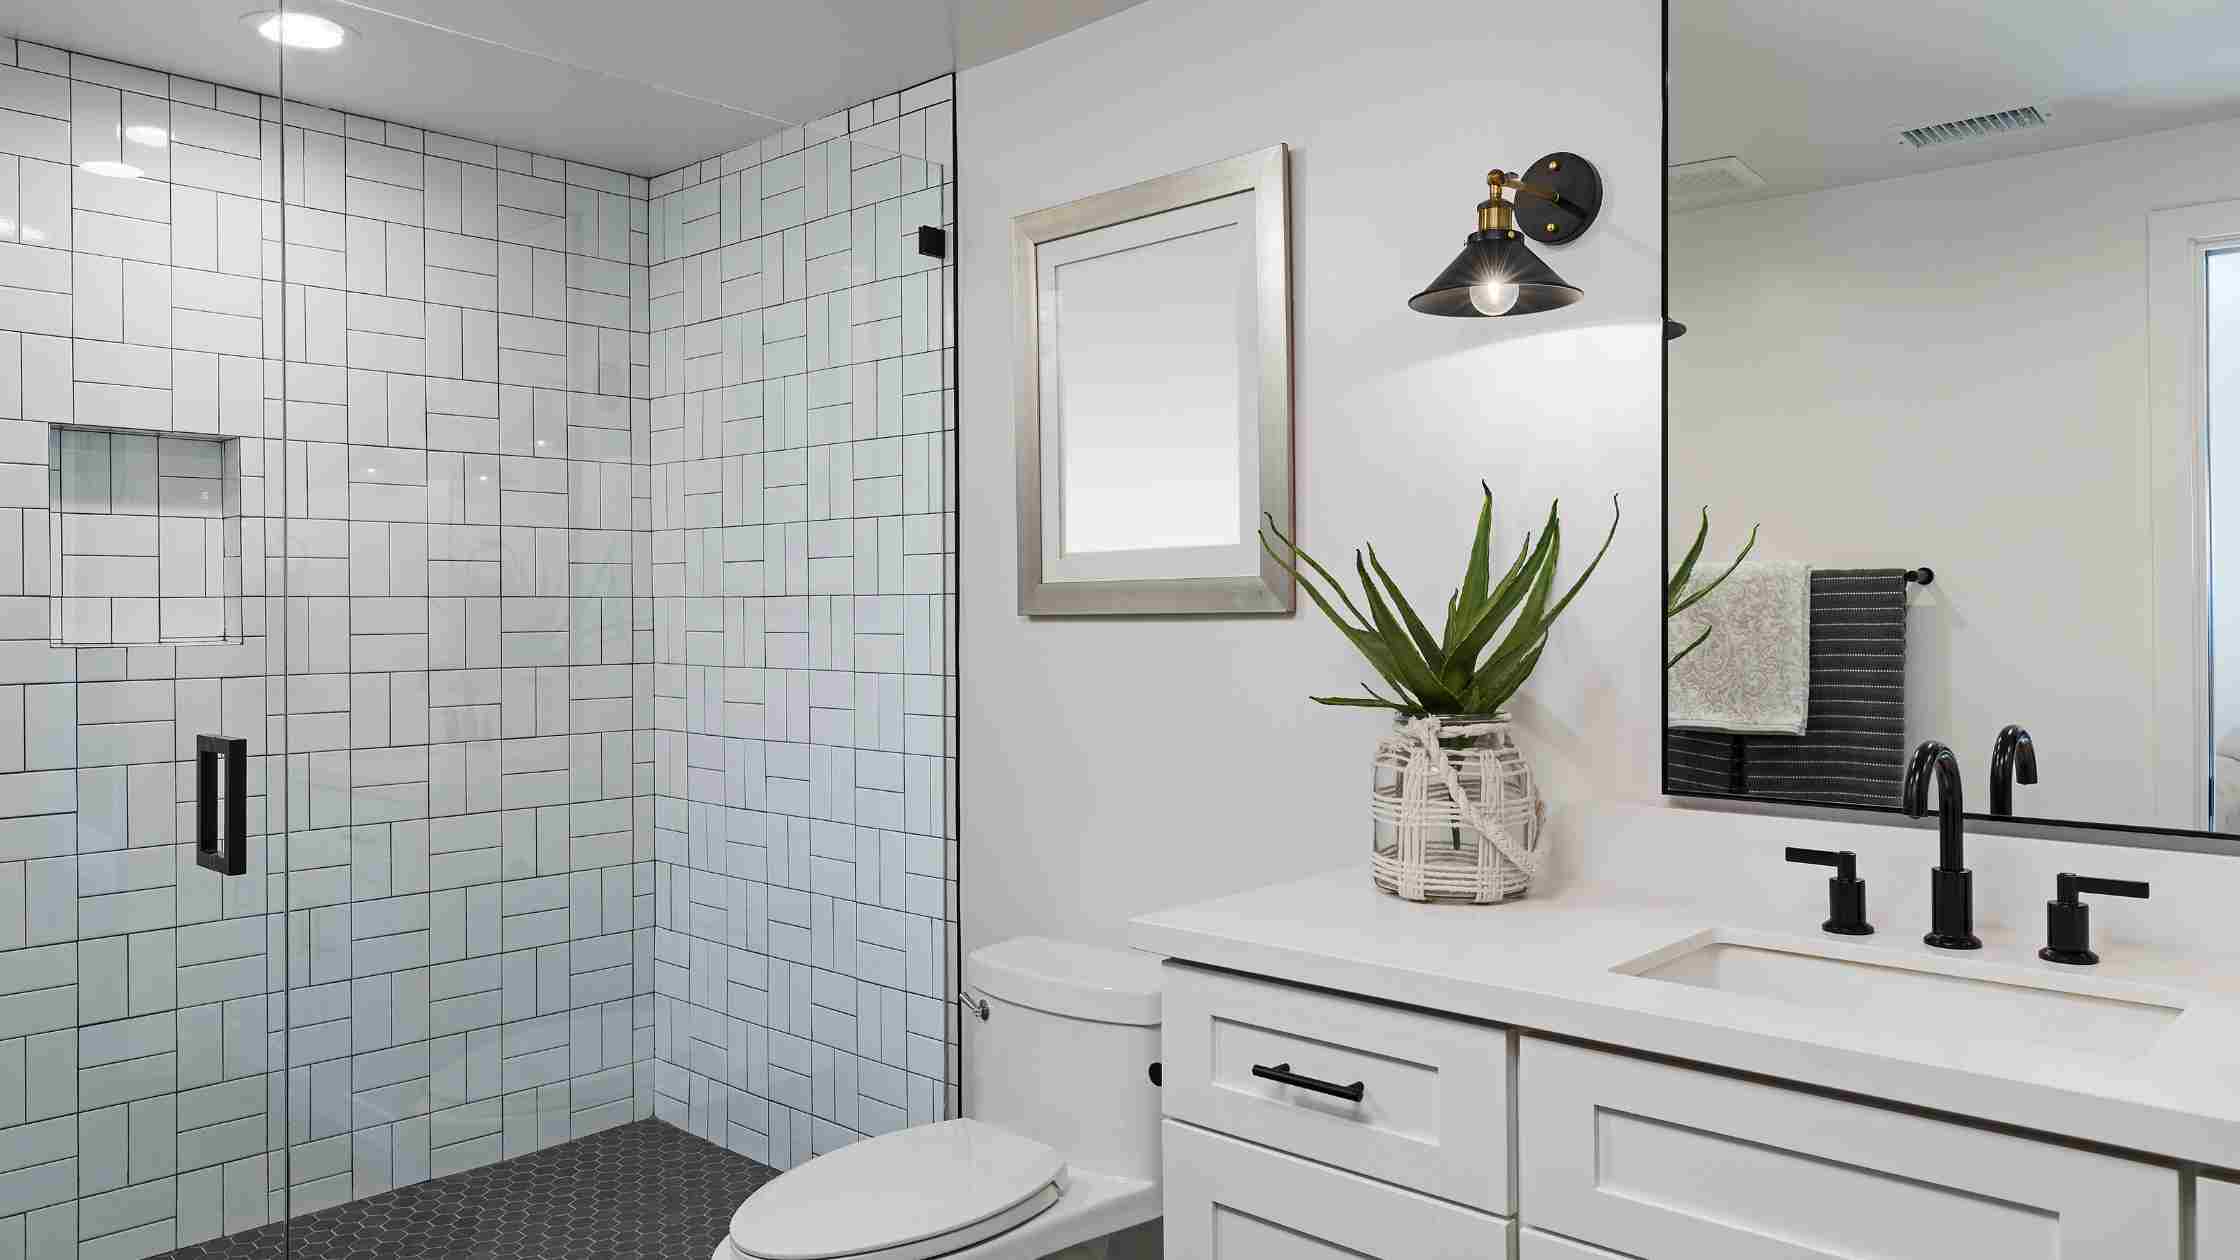 6 Simple Things To Soundproof A Bathroom Without Spending A Ton of Money!